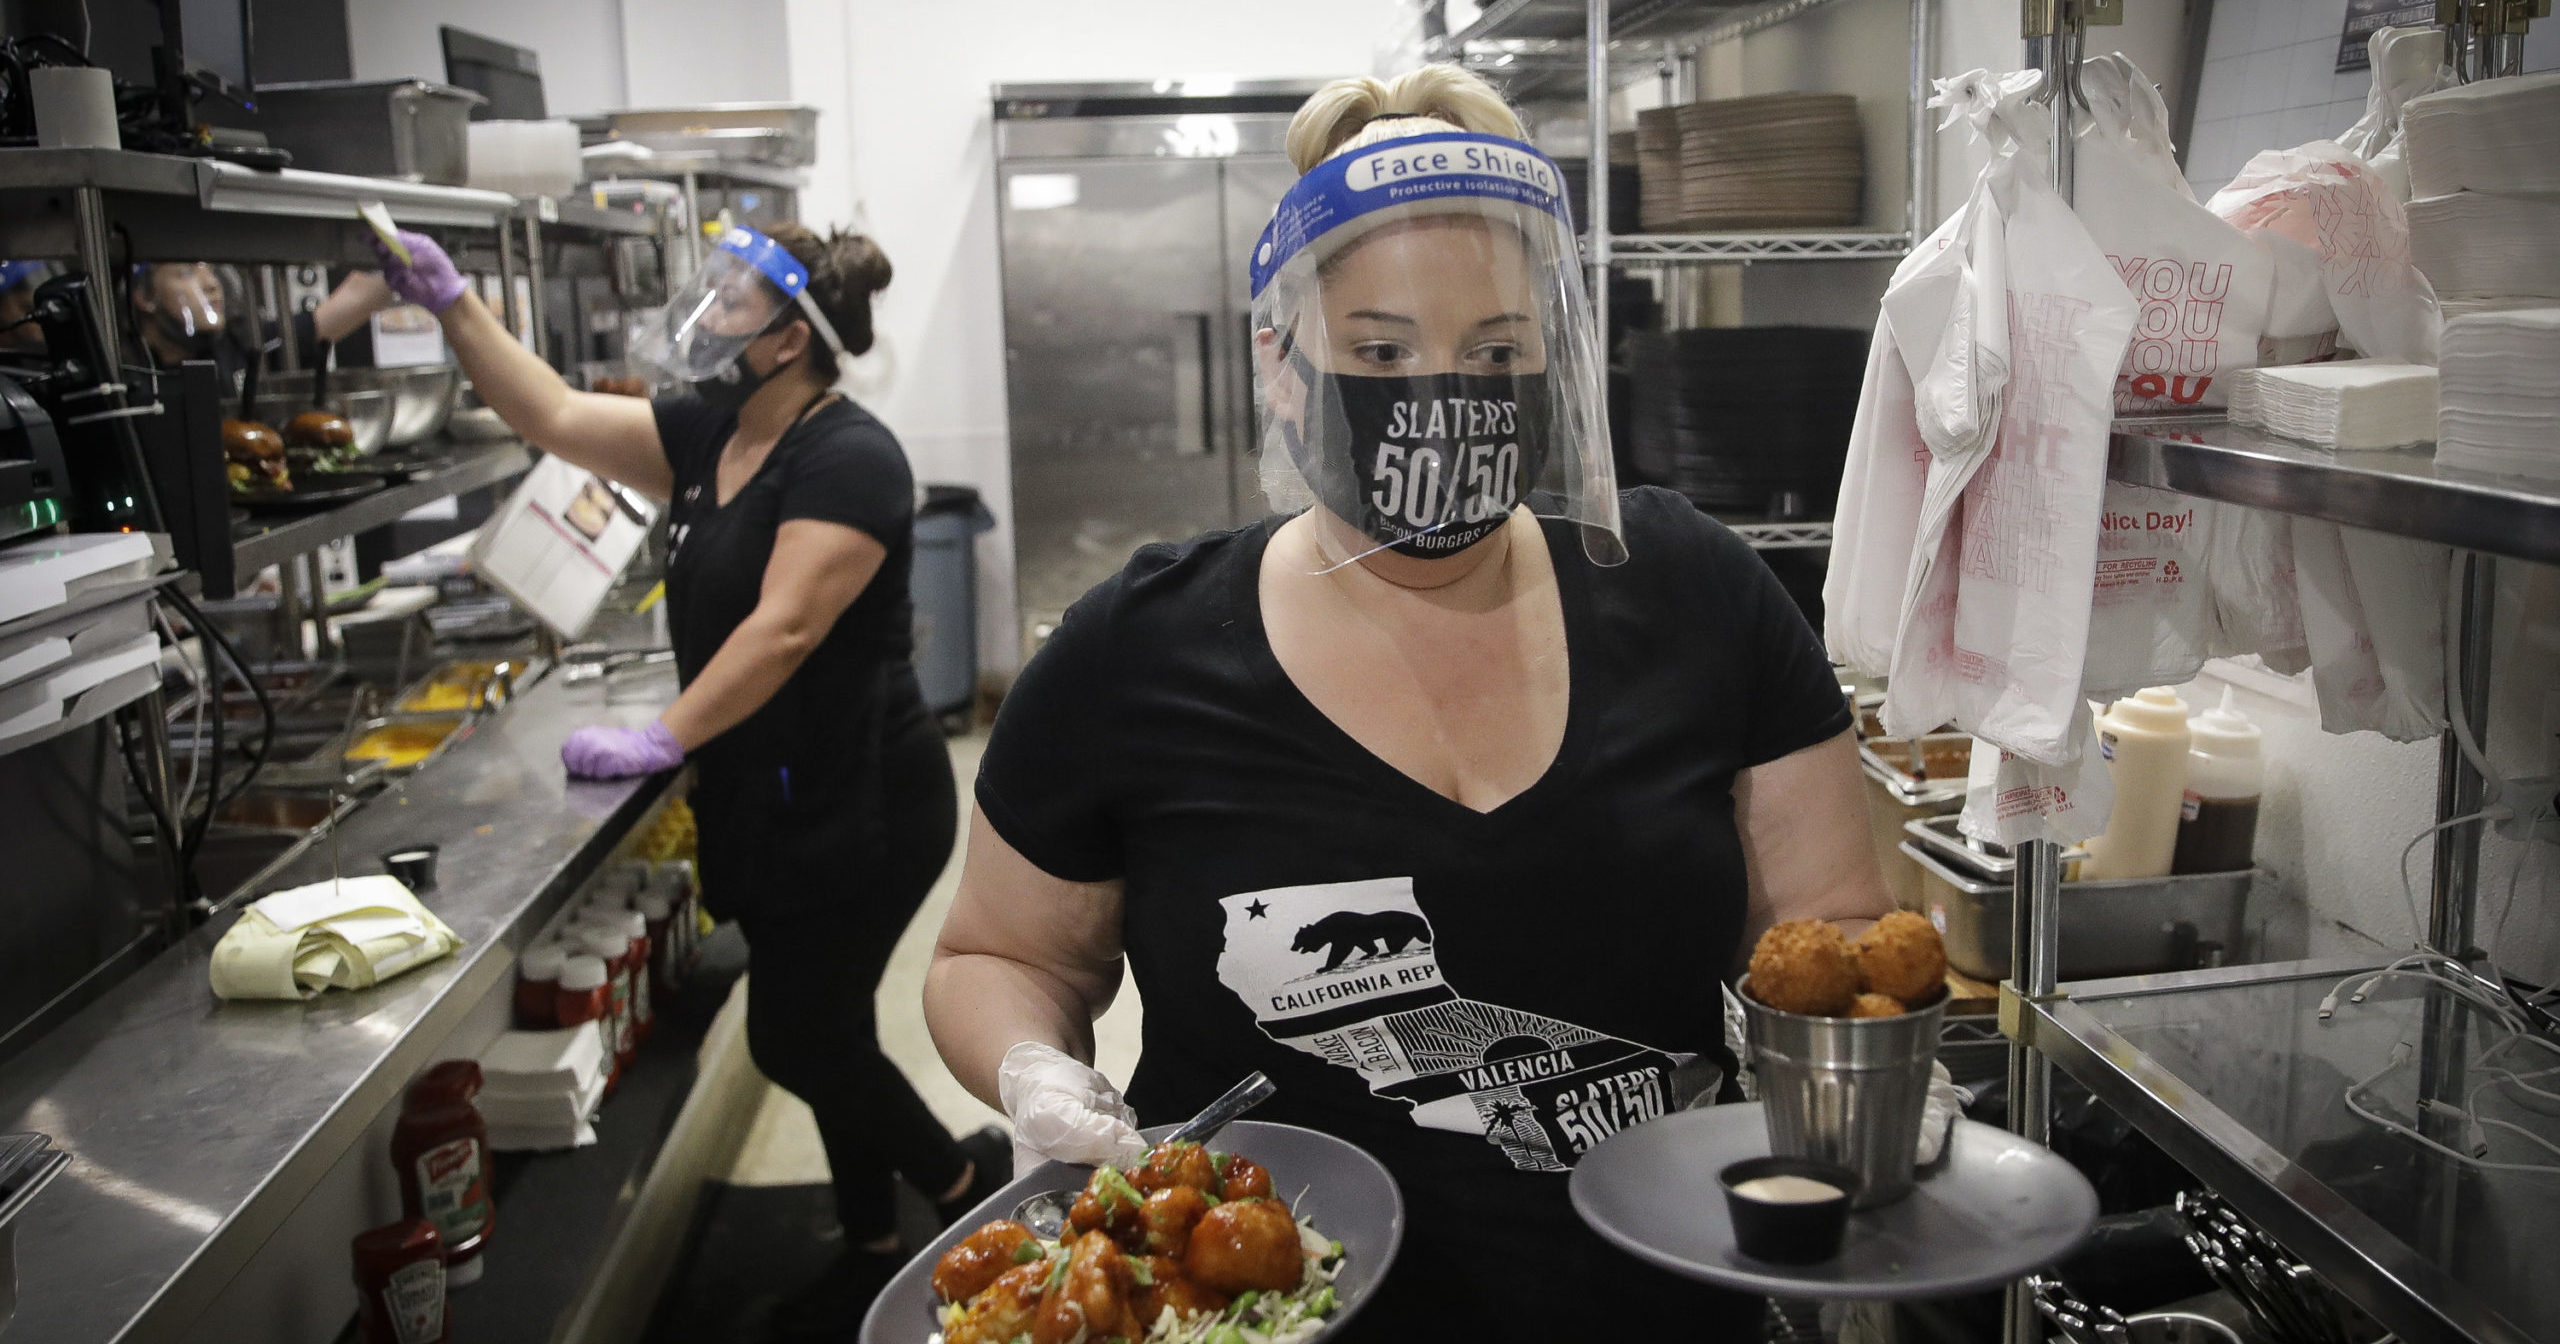 In this July 1, 2020, file photo, a waitress takes a food order from the kitchen at Slater's 50/50 in Santa Clarita, California. Gov. Gavin Newsom announced a new process on Aug. 28, 2020, for reopening California businesses that is more gradual than the state's current rules.